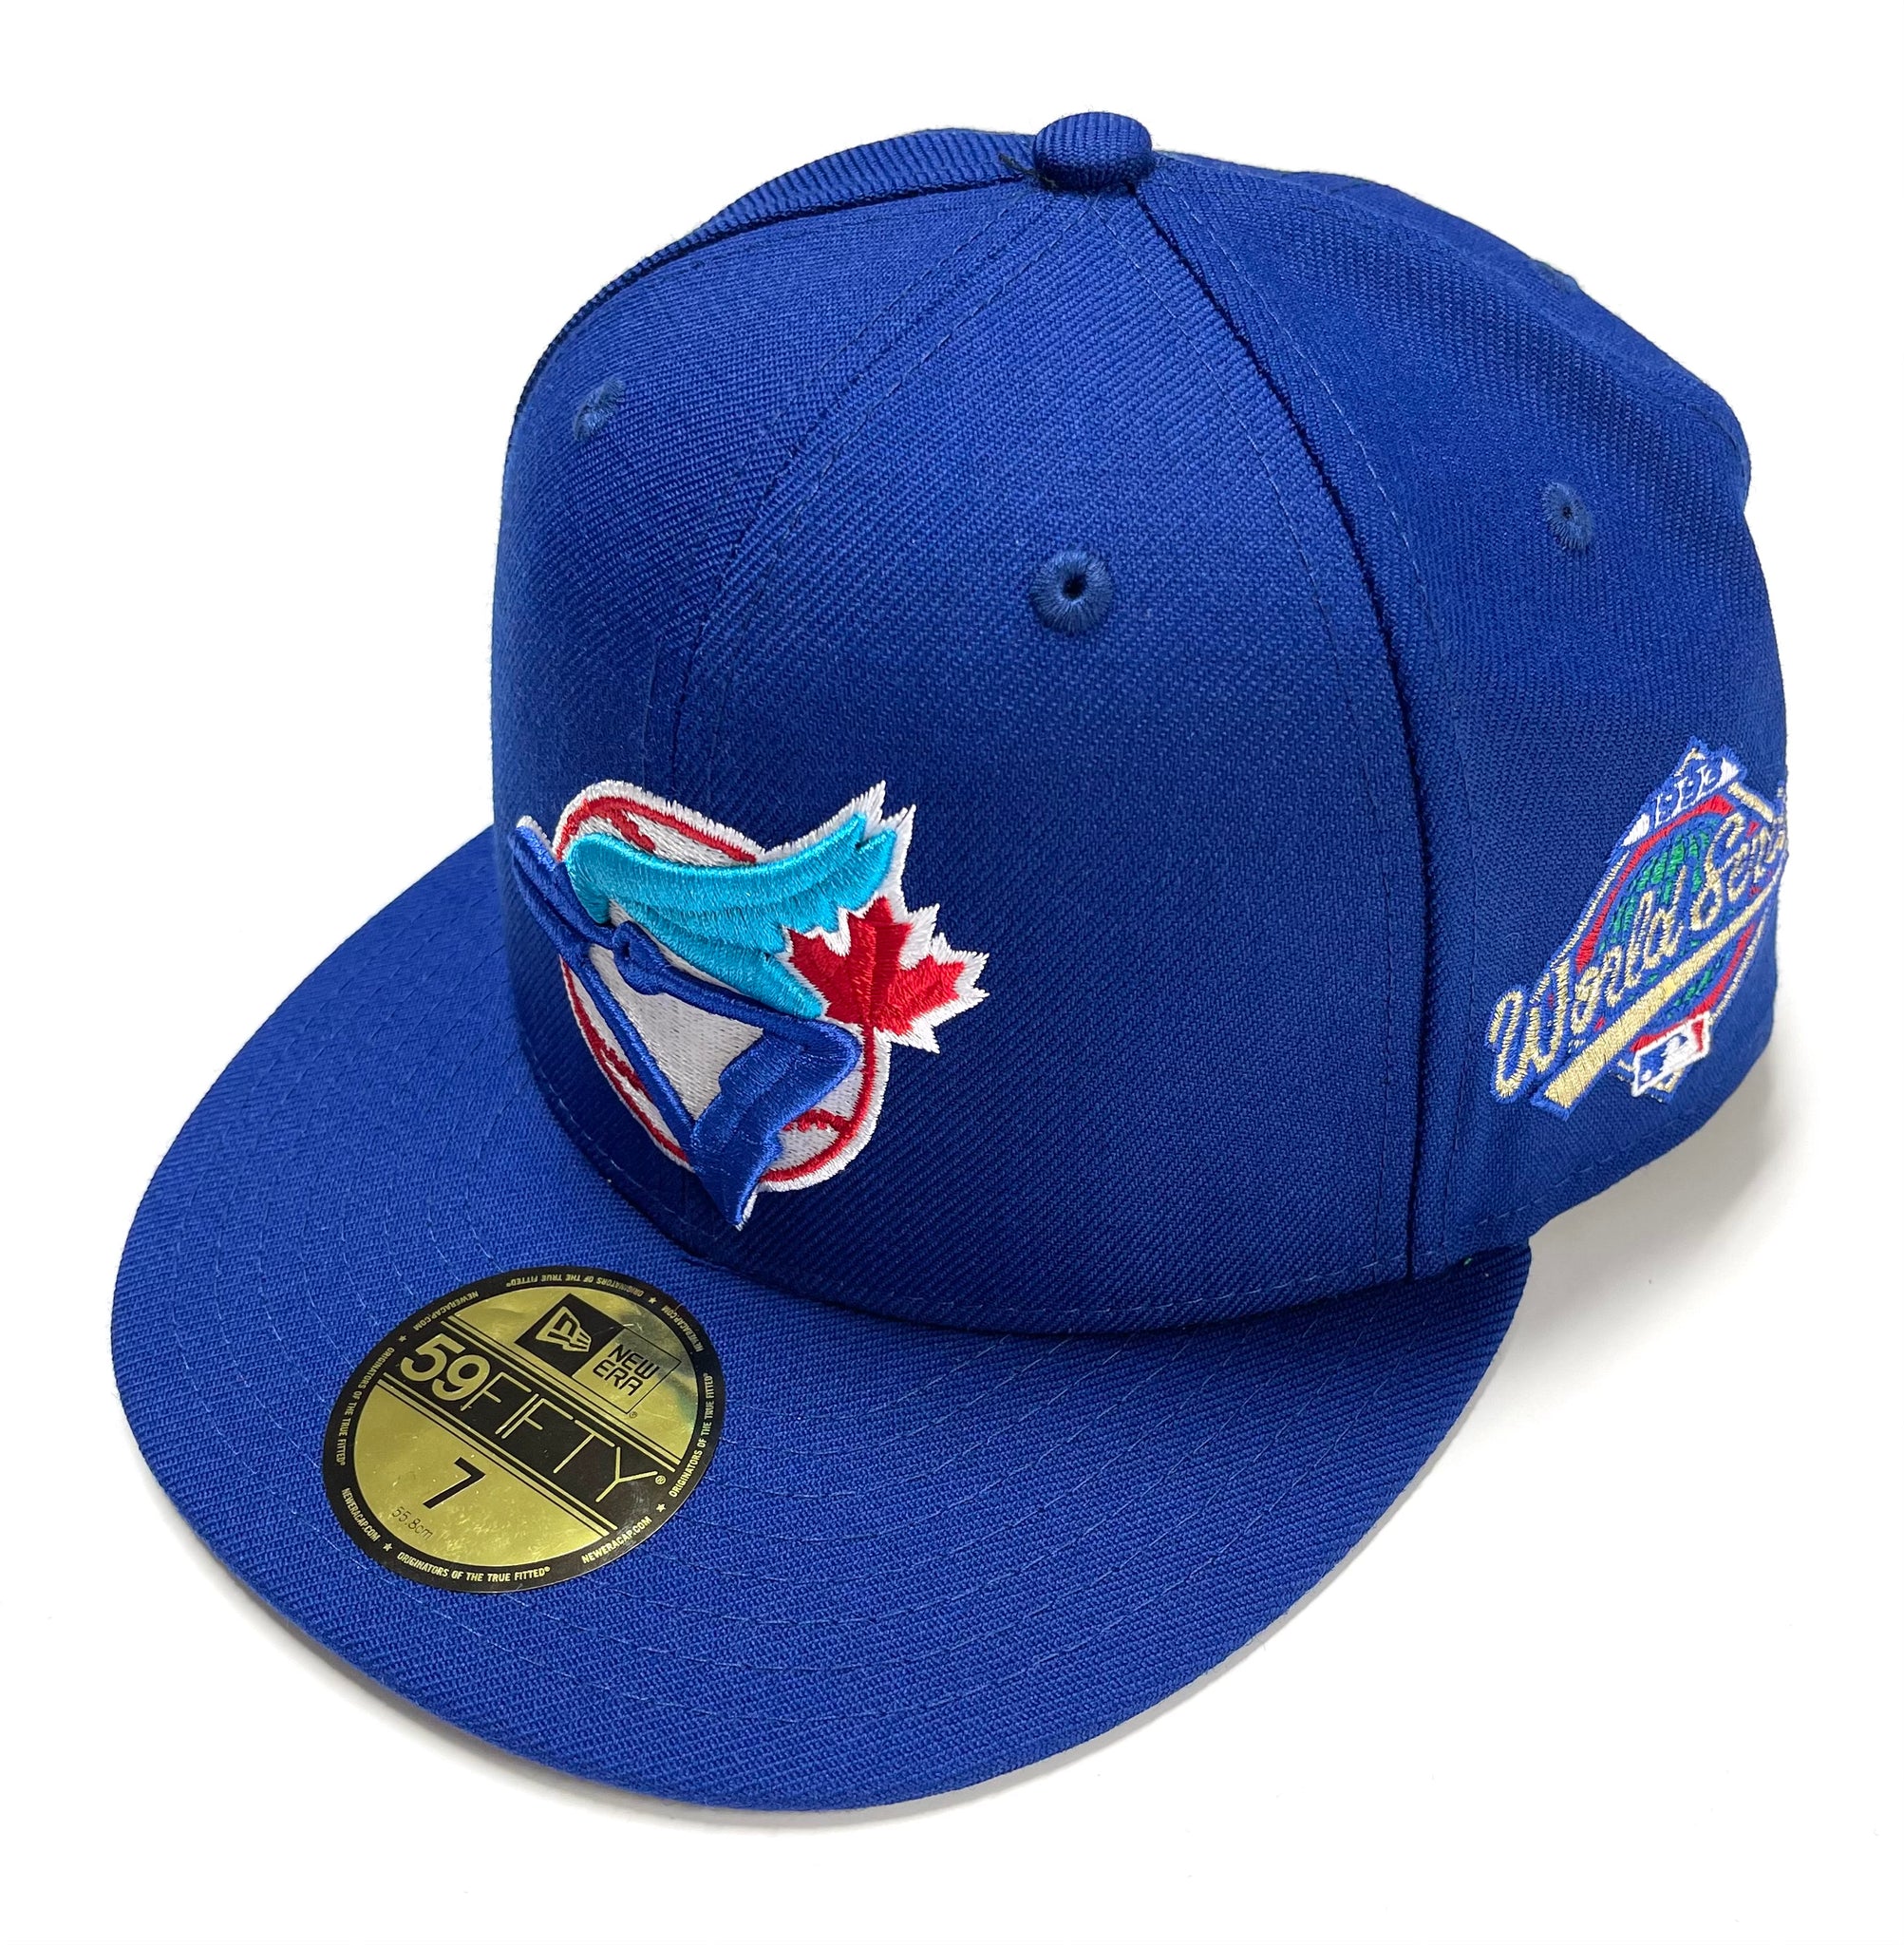 NEW ERA 1993 WS SIDE PATCH TORONTO BLUEJAYS FITTED HAT – So